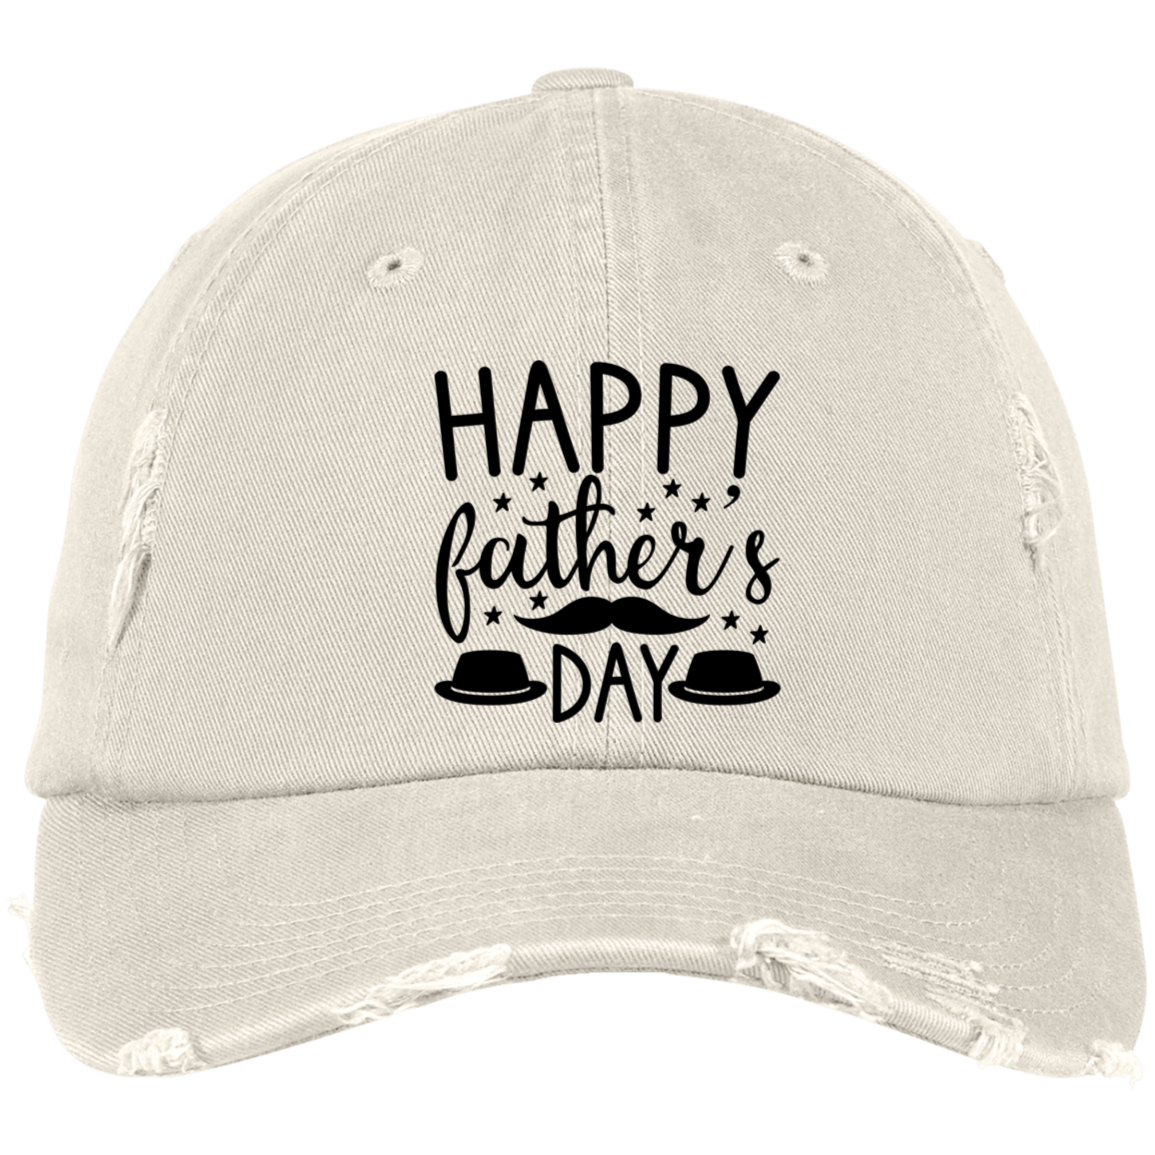 Happy Fathers Day Embroidered Distressed Dad Cap